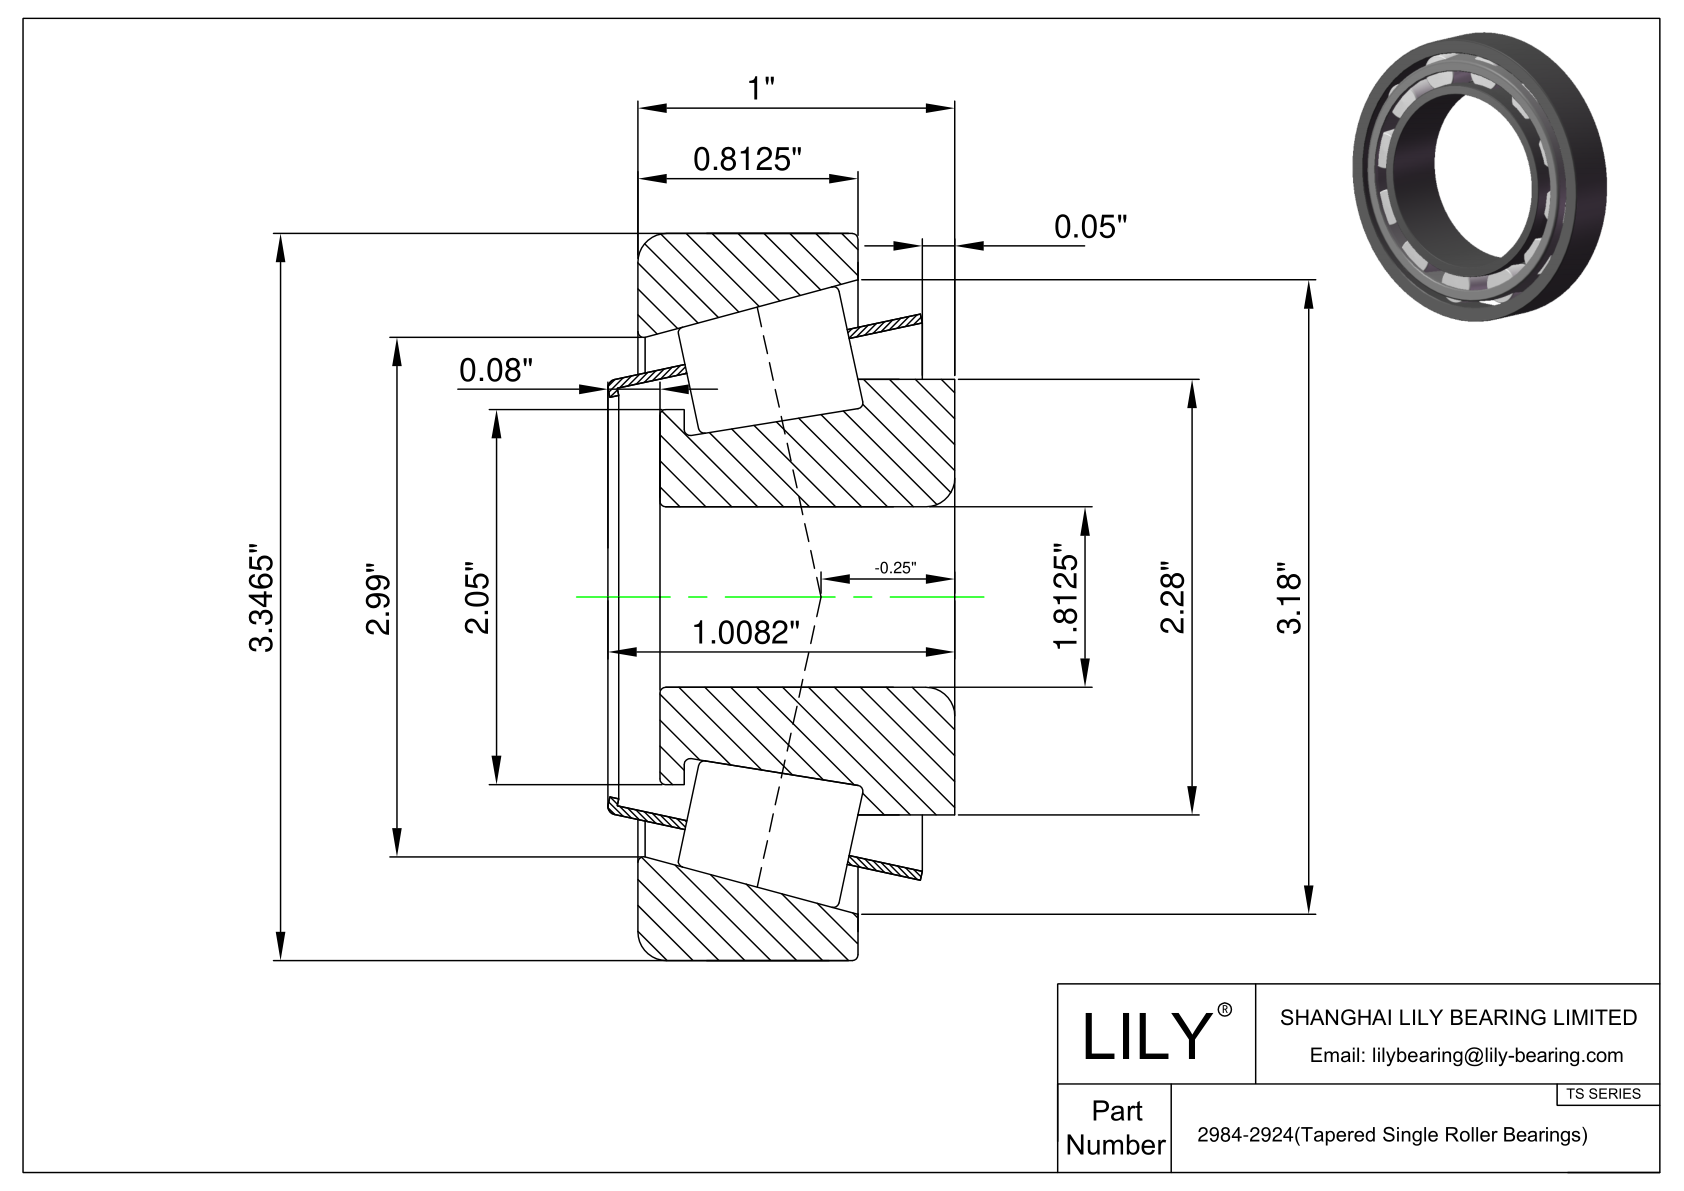 2984-2924 TS (Tapered Single Roller Bearings) (Imperial) cad drawing